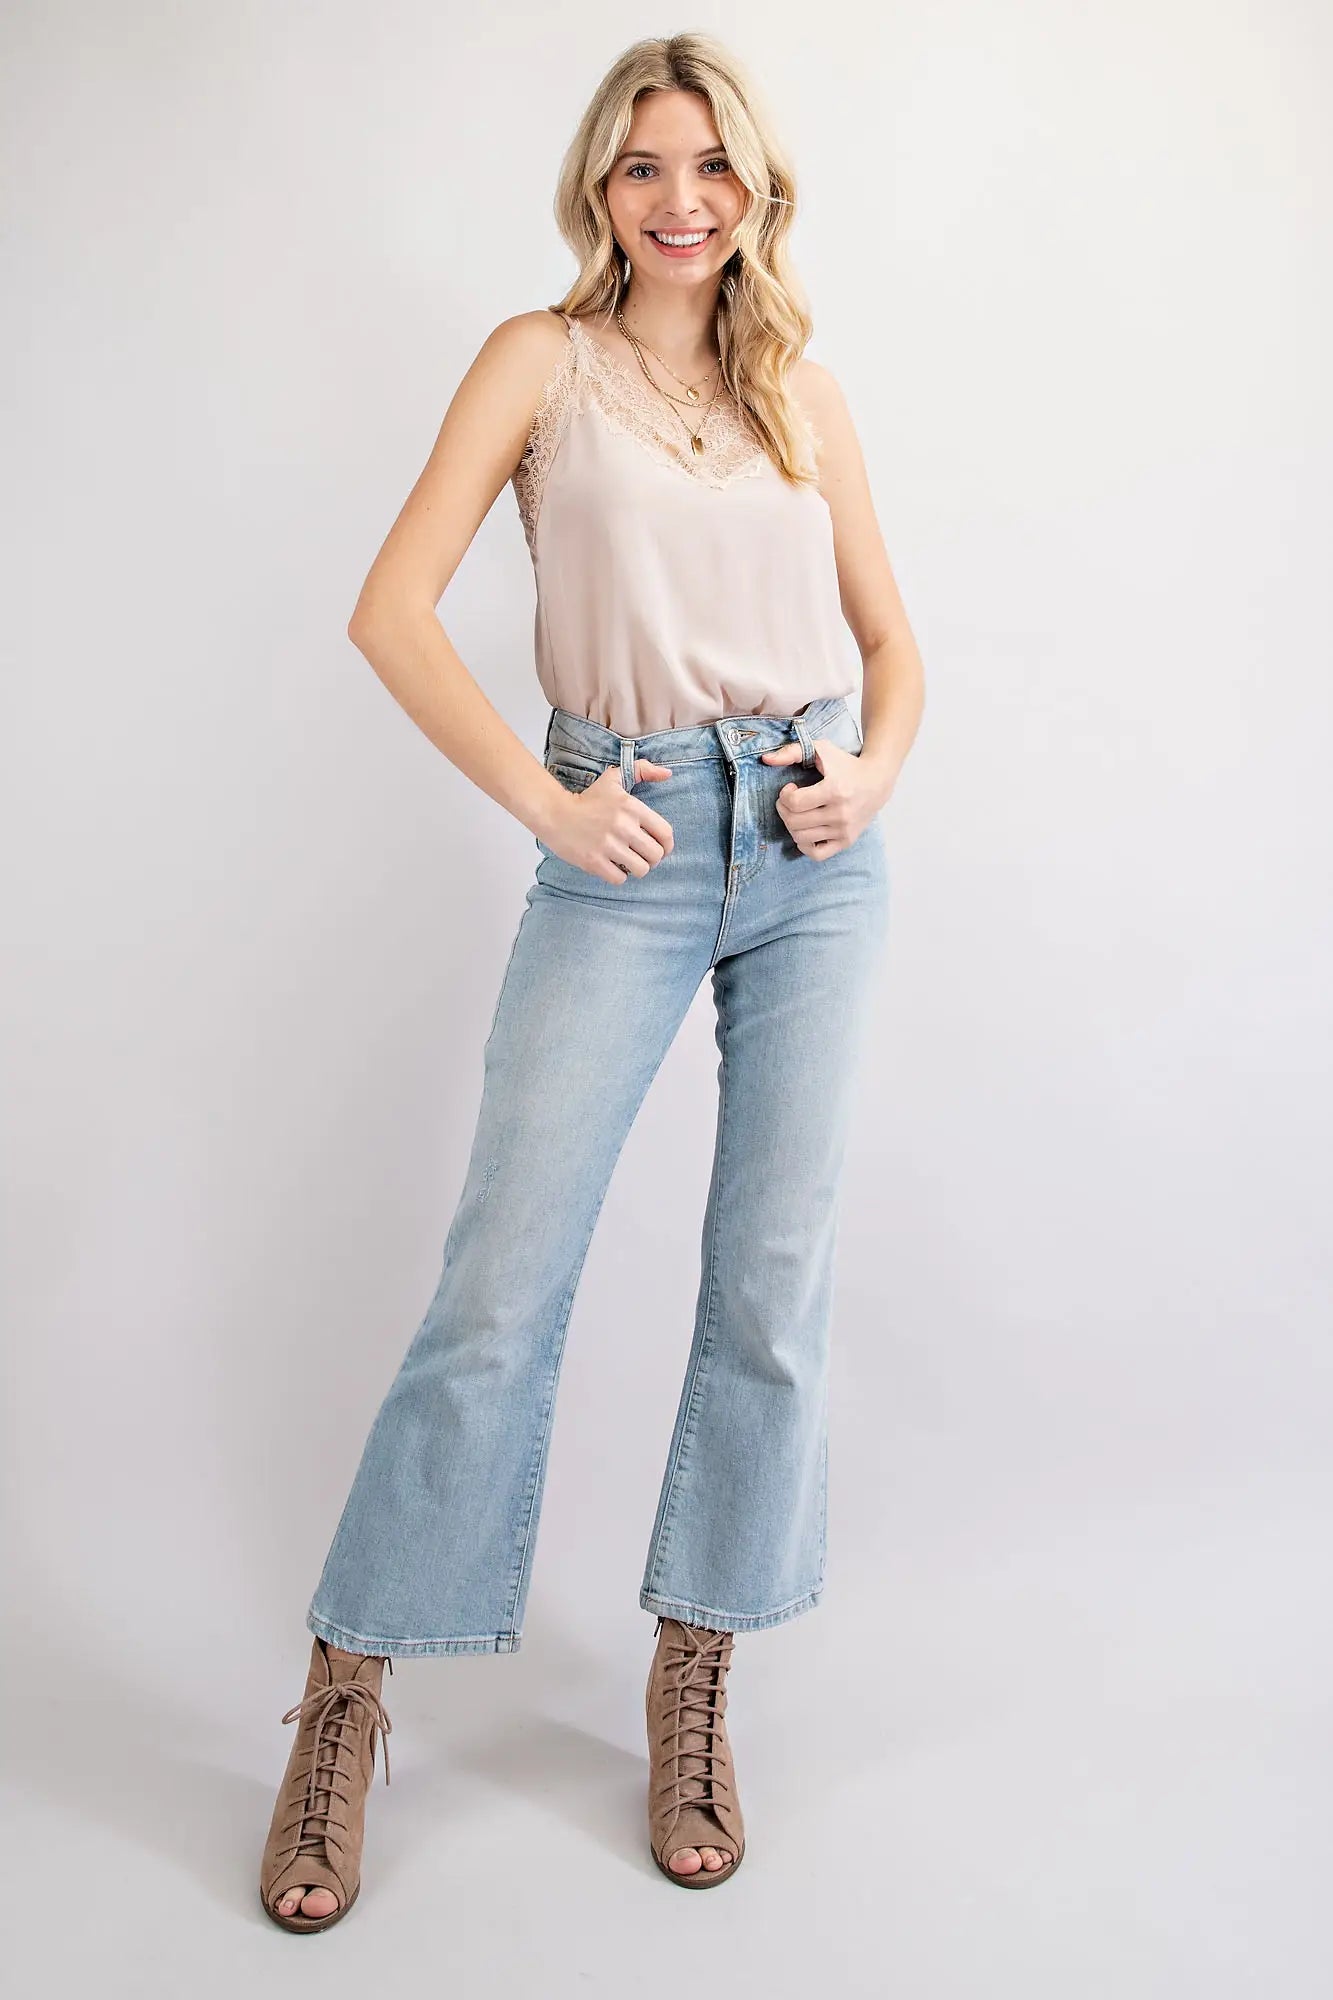 Girl wearing a Champagne colored bodysuit and jeans. This is perfect for the warm days in San Luis Obispo.